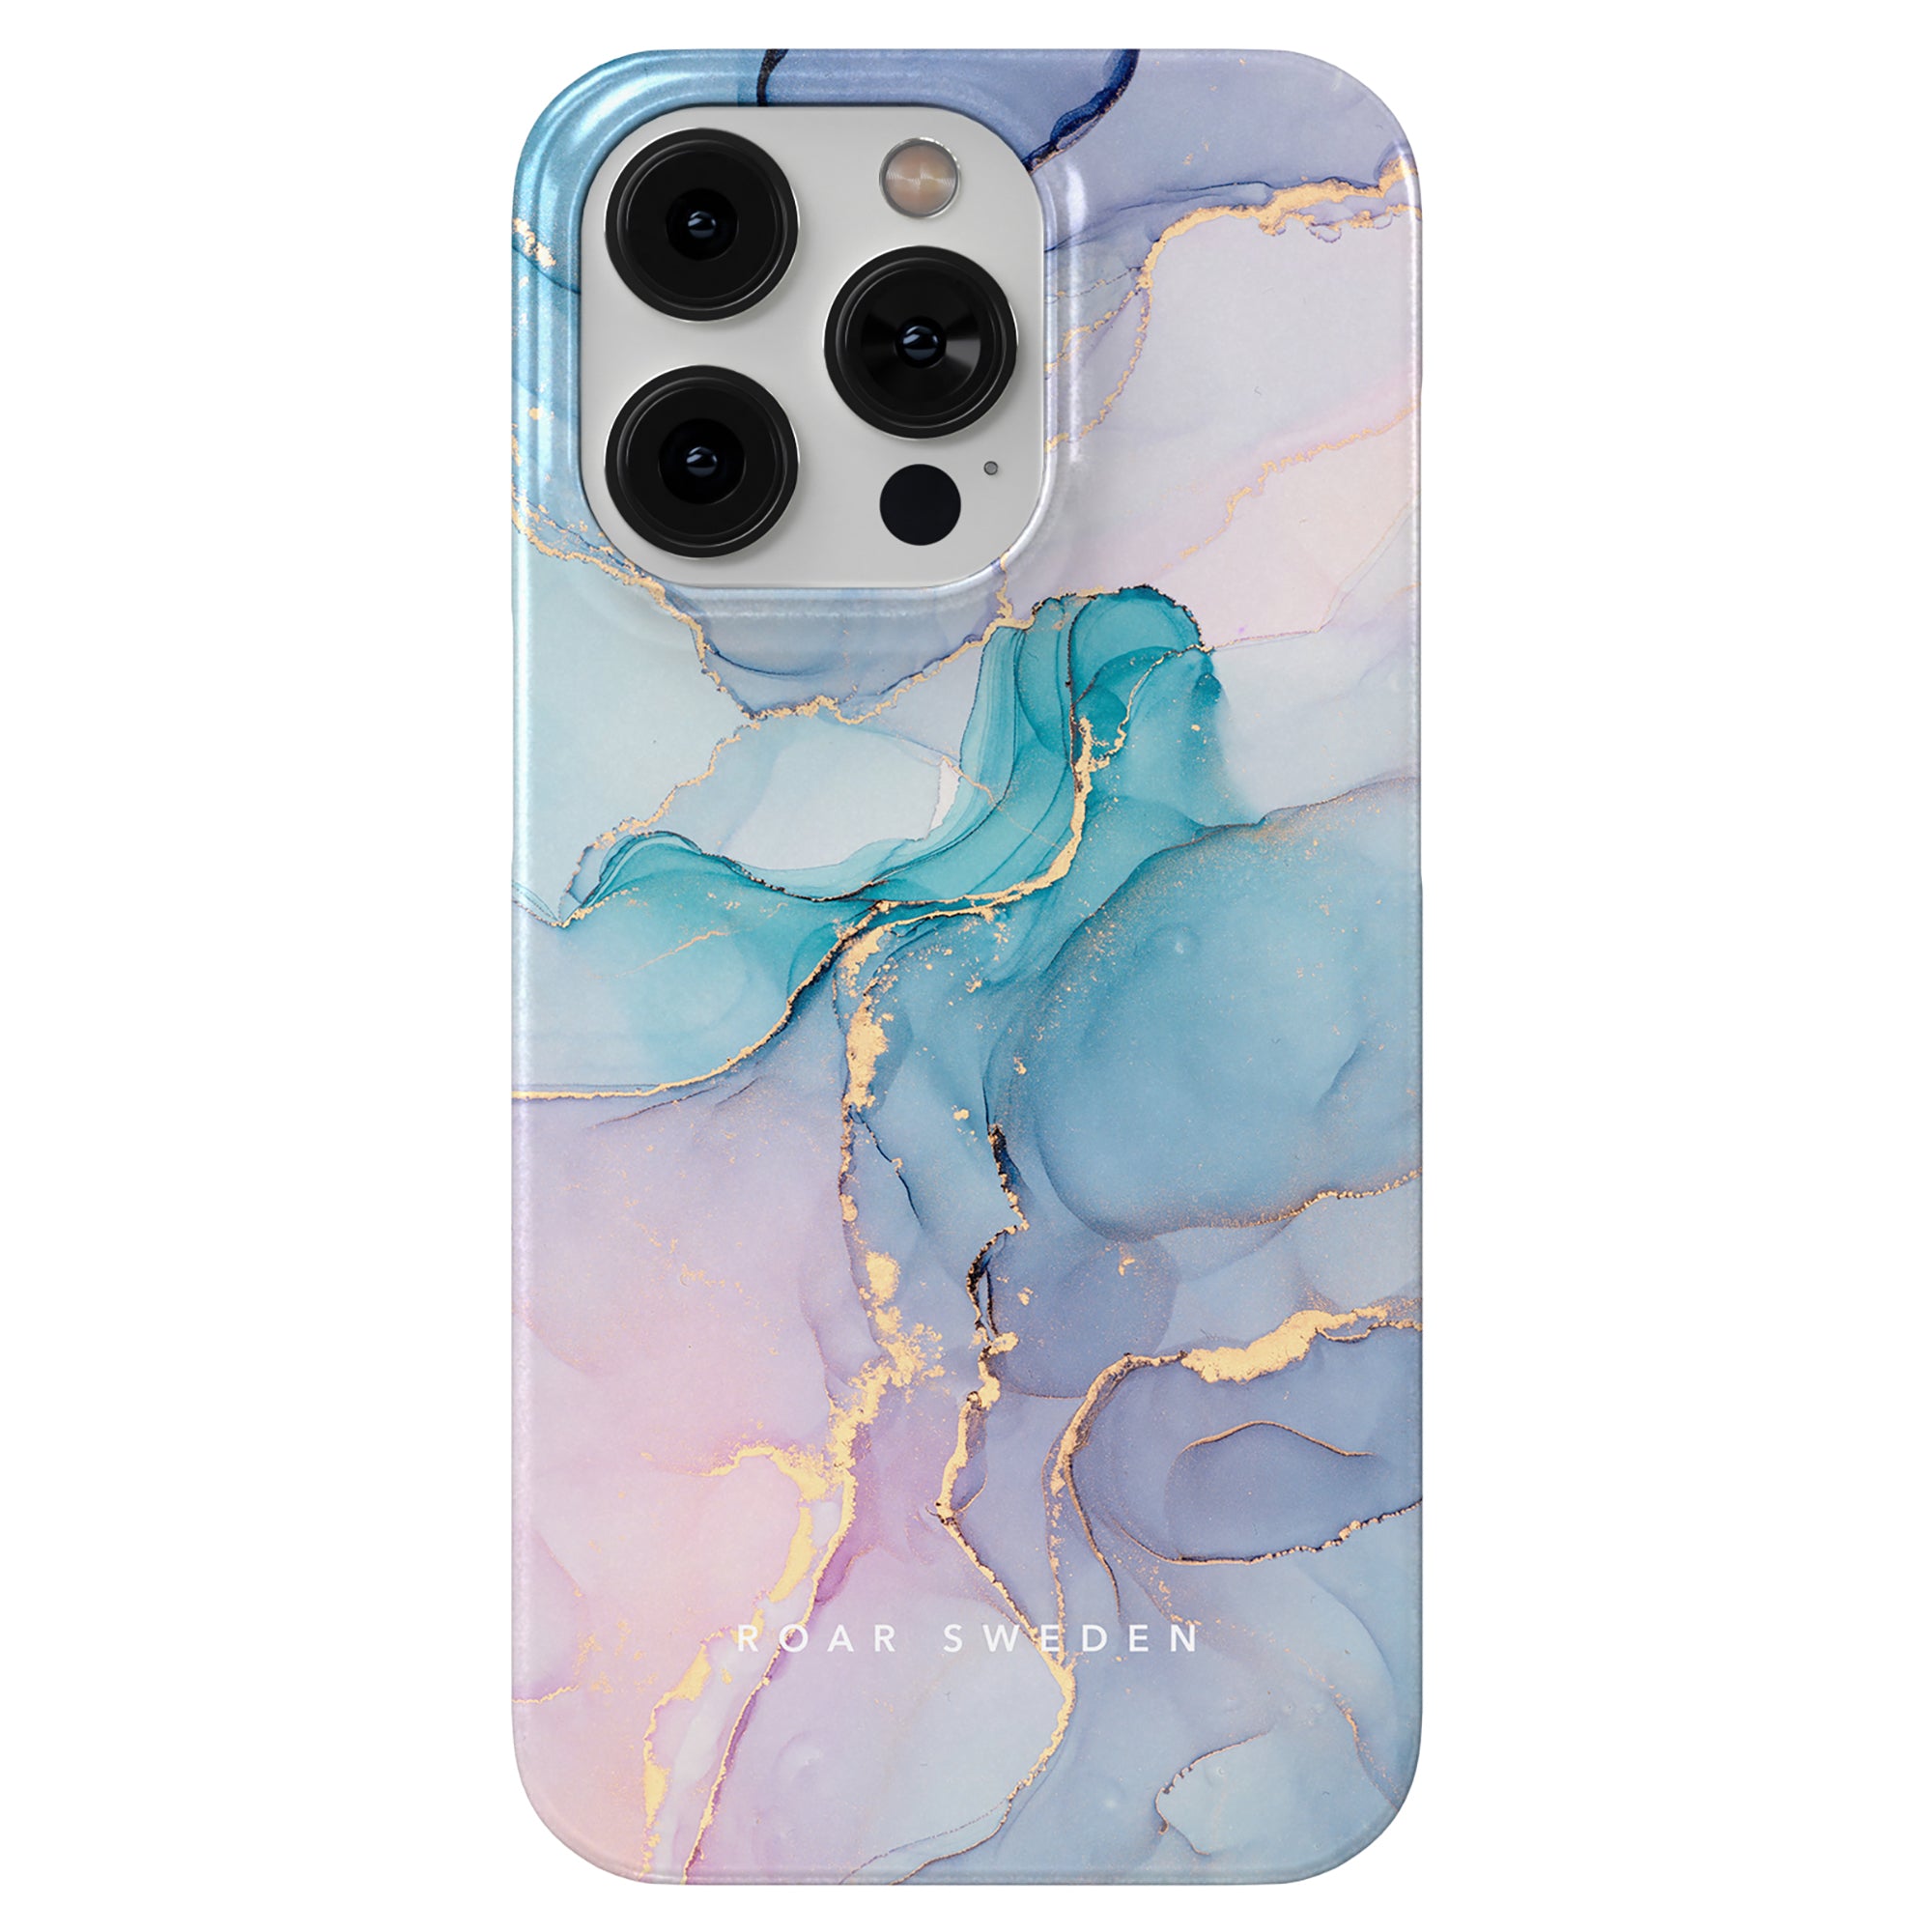 A blue and gold Swirl - Slim case by Roar Sweden for the iPhone 11, offering stylish skydd.